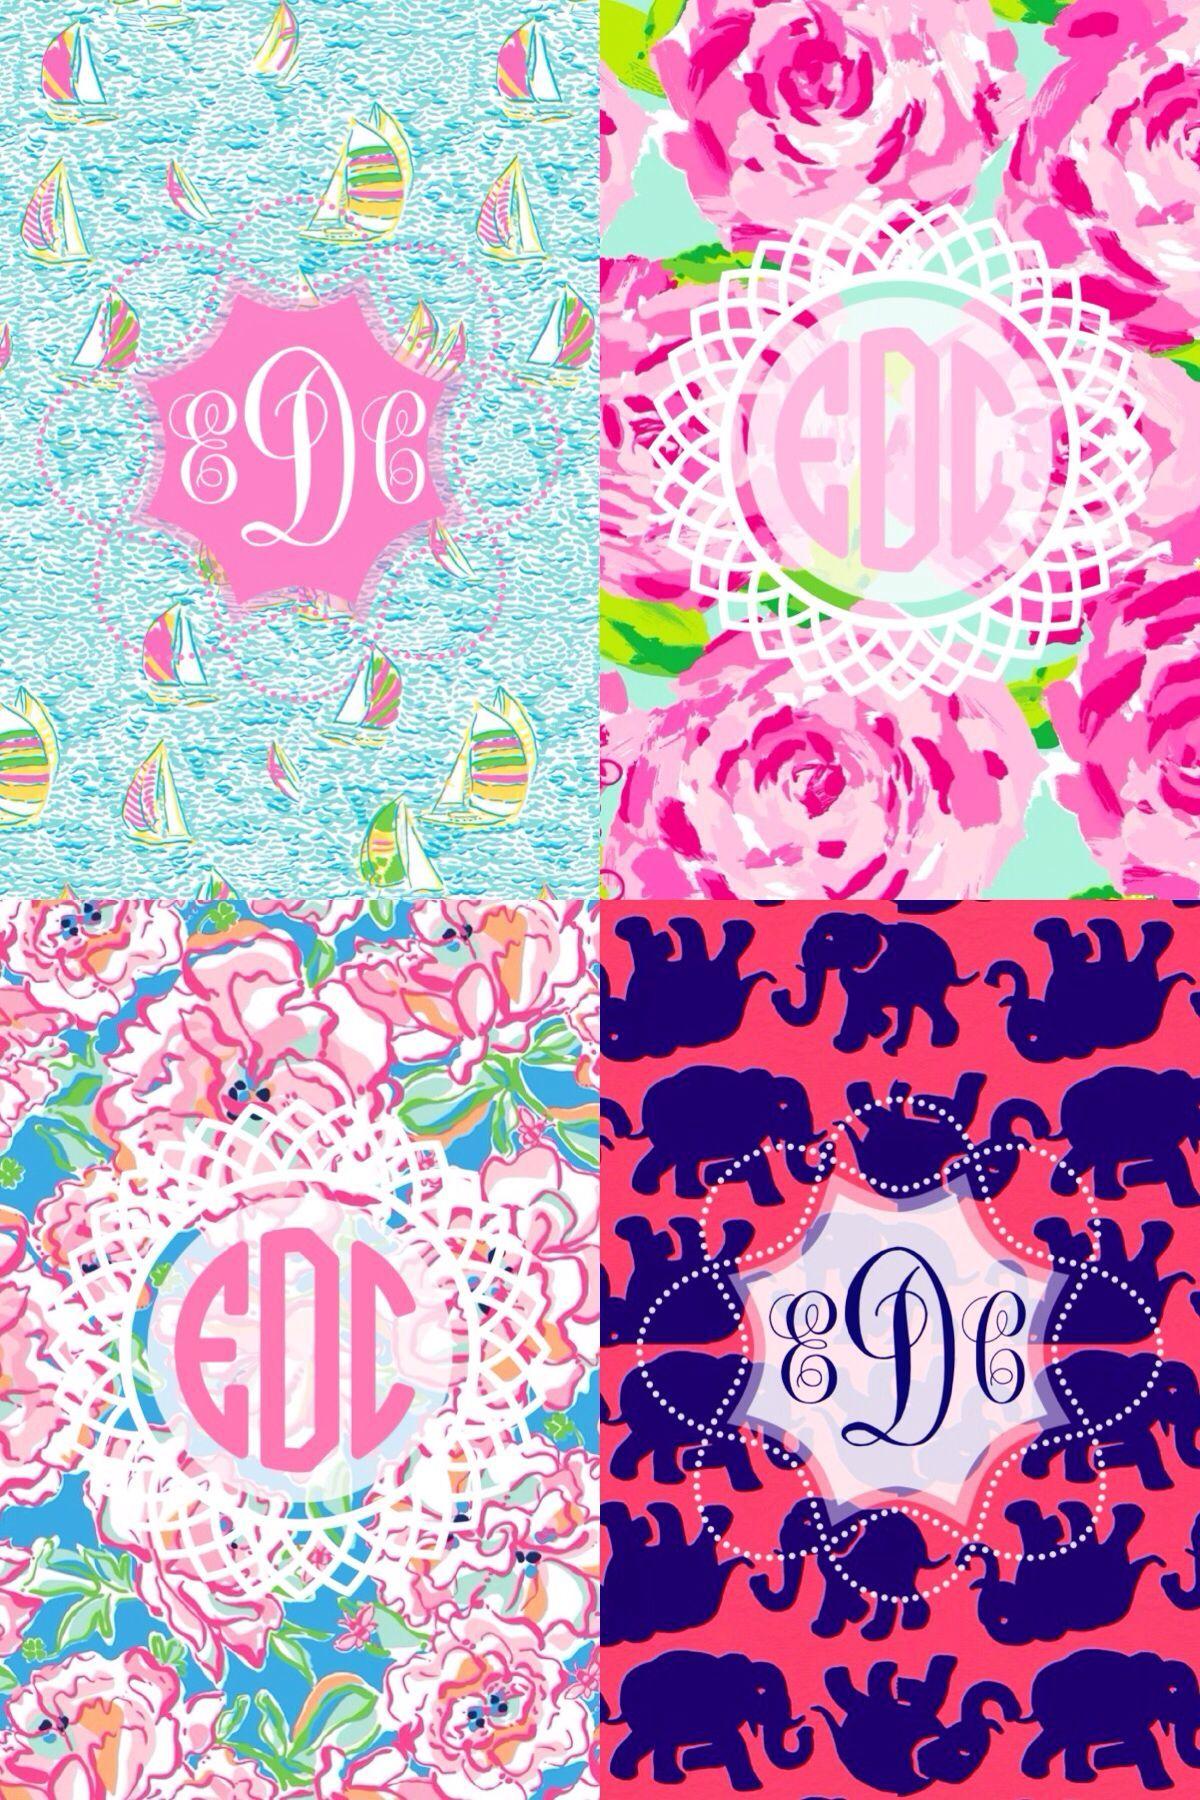 Monogram Wallpapers & Free HD Backgrounds Maker by Space-O Infoweb